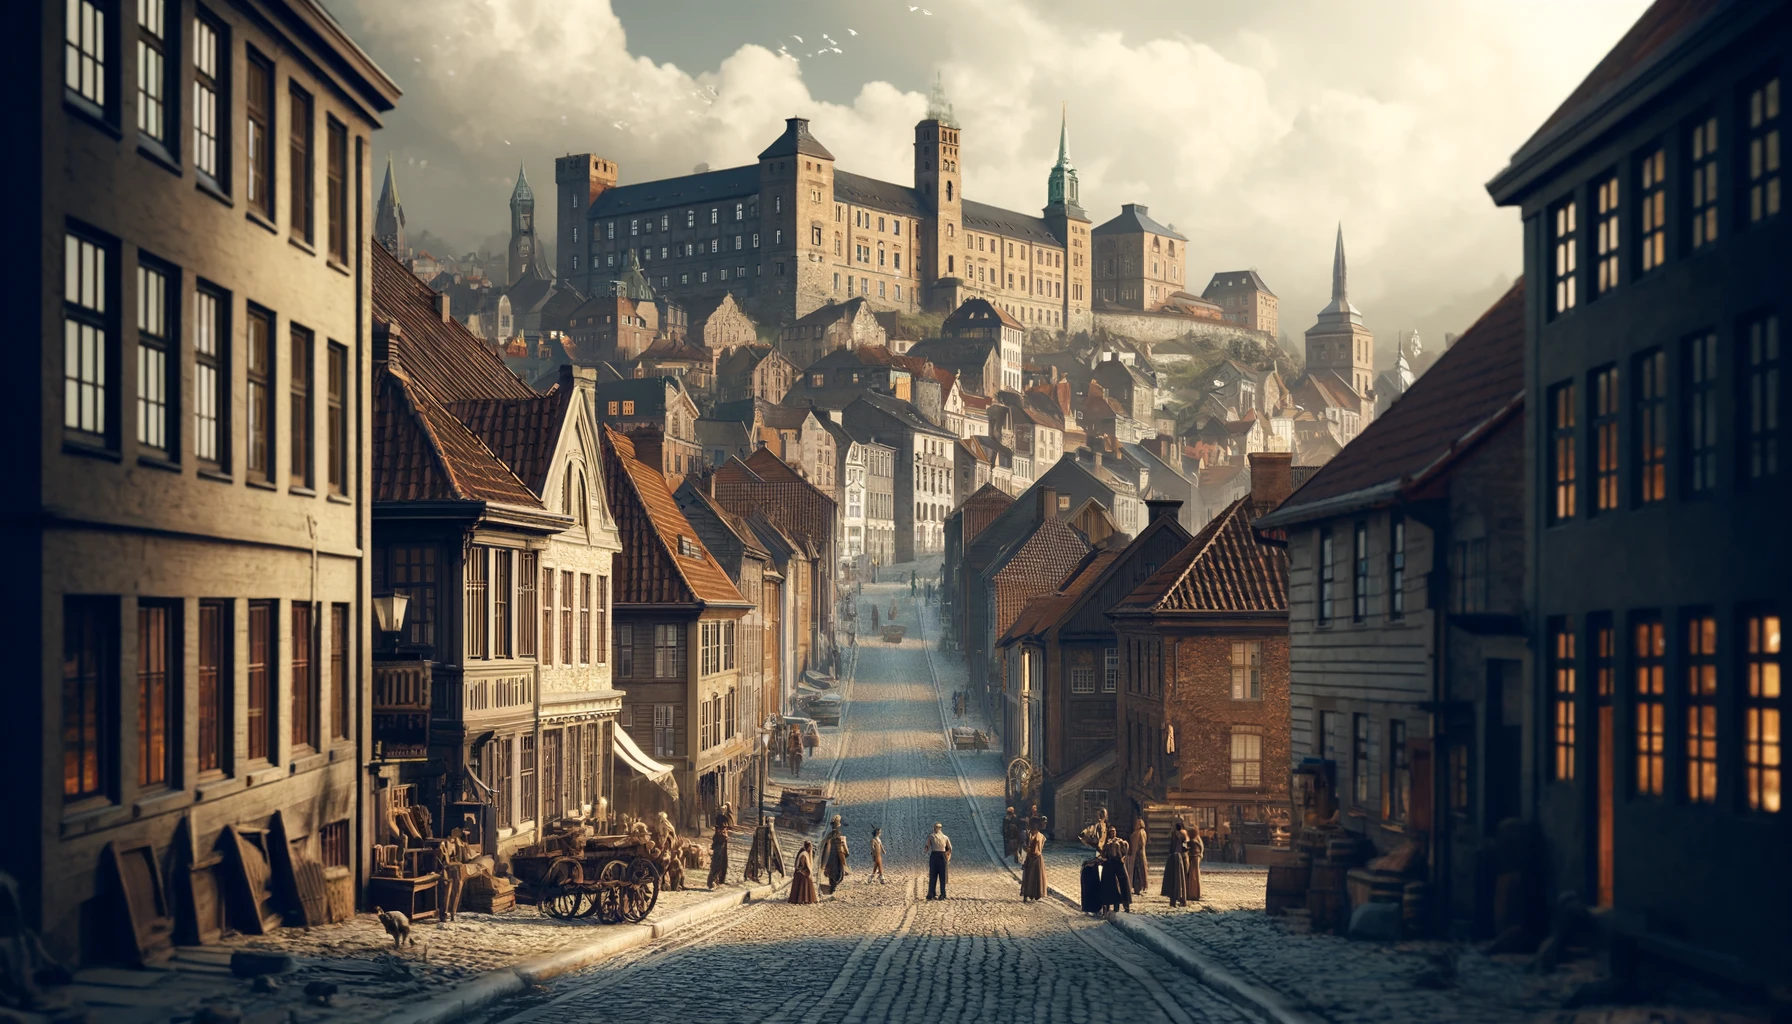 Historical scene of Oslo, featuring the majestic Akershus Fortress 